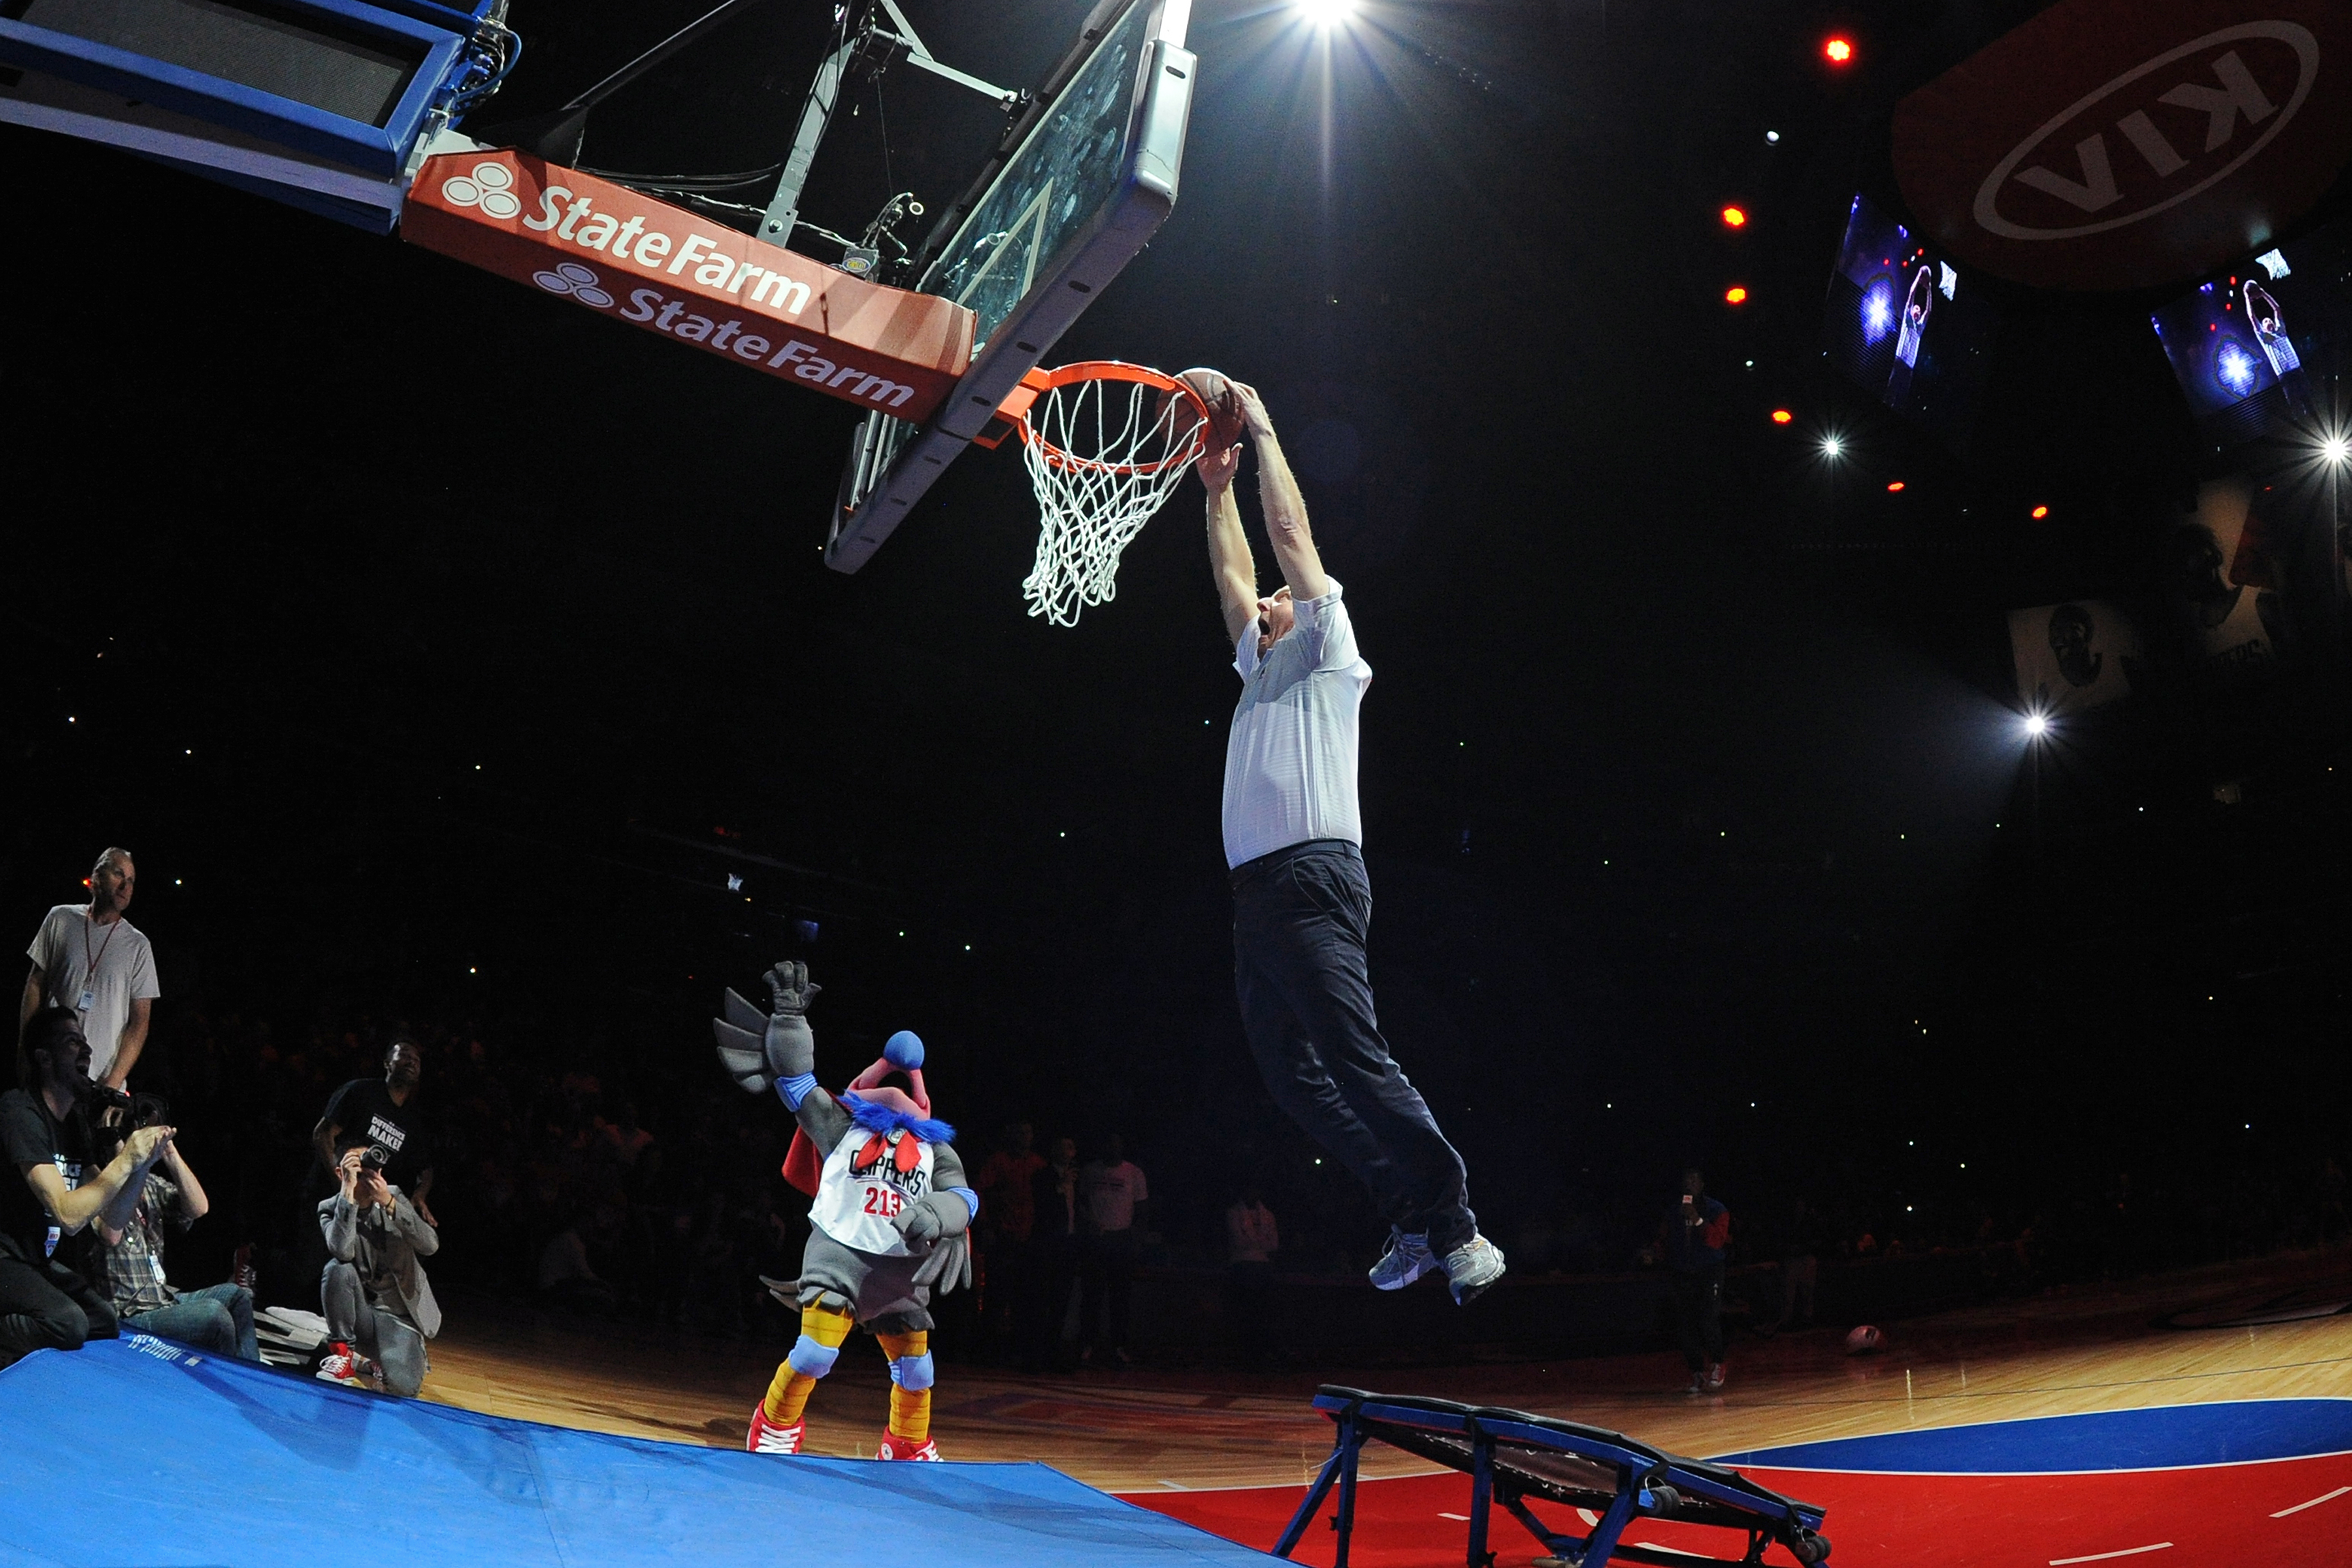 Los Angeles Clippers owner Steve Ballmer dunks during halftime of the game against the Brooklyn Nets at STAPLES Center on Feb. 29, 2016 in Los Angeles, California. (Andrew D. Bernstein&mdash;NBAE/Getty Images)